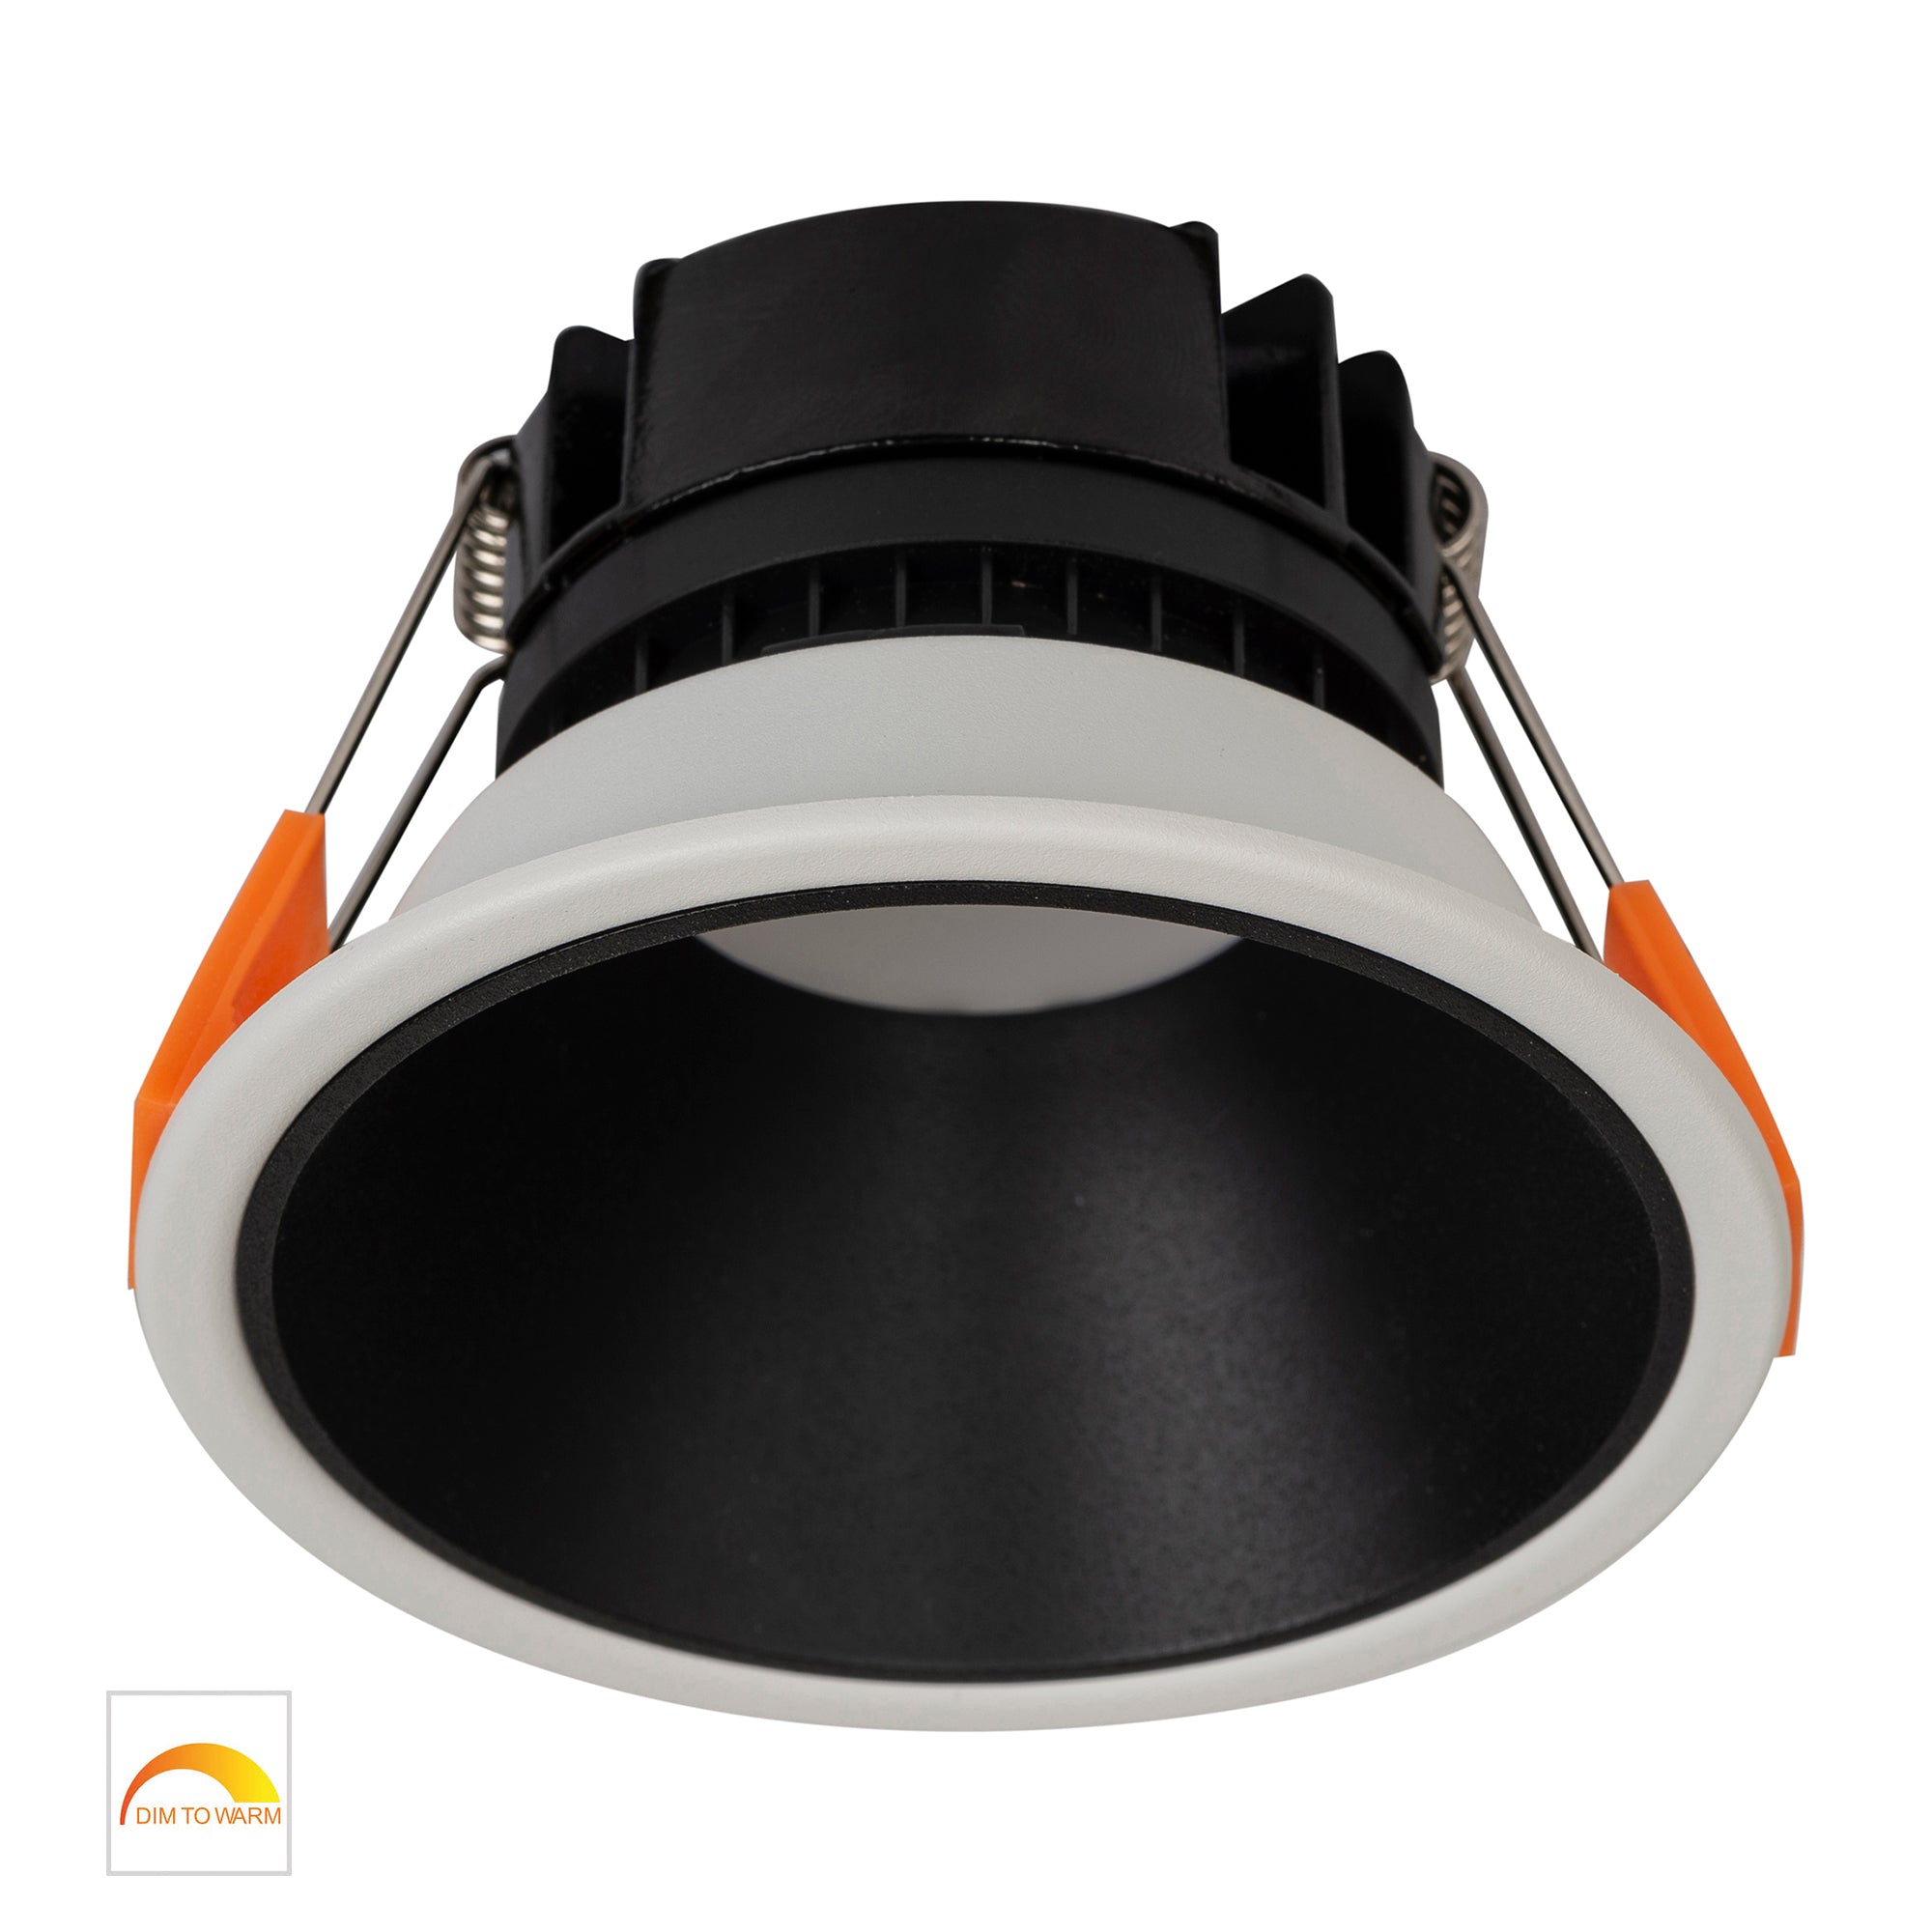 HV5528D2W-WB - Gleam White with Black Insert Fixed Dim to Warm LED Downlight